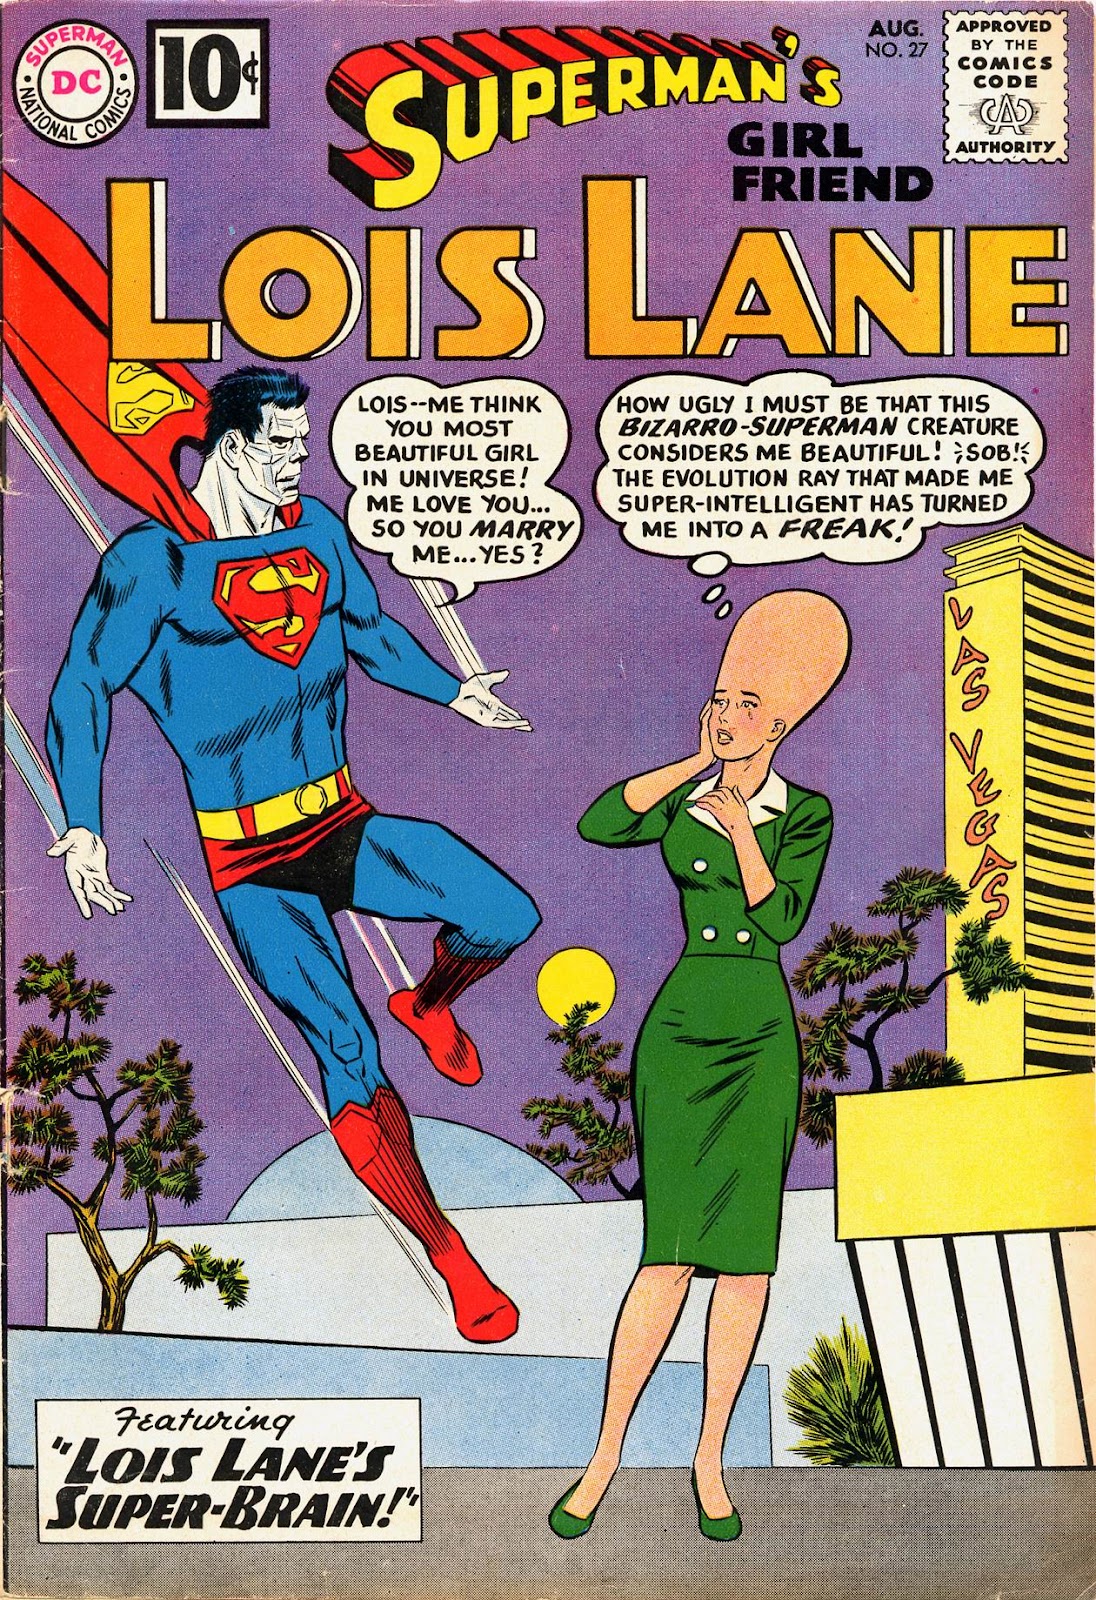 Superman's Girl Friend, Lois Lane issue 27 - Page 1